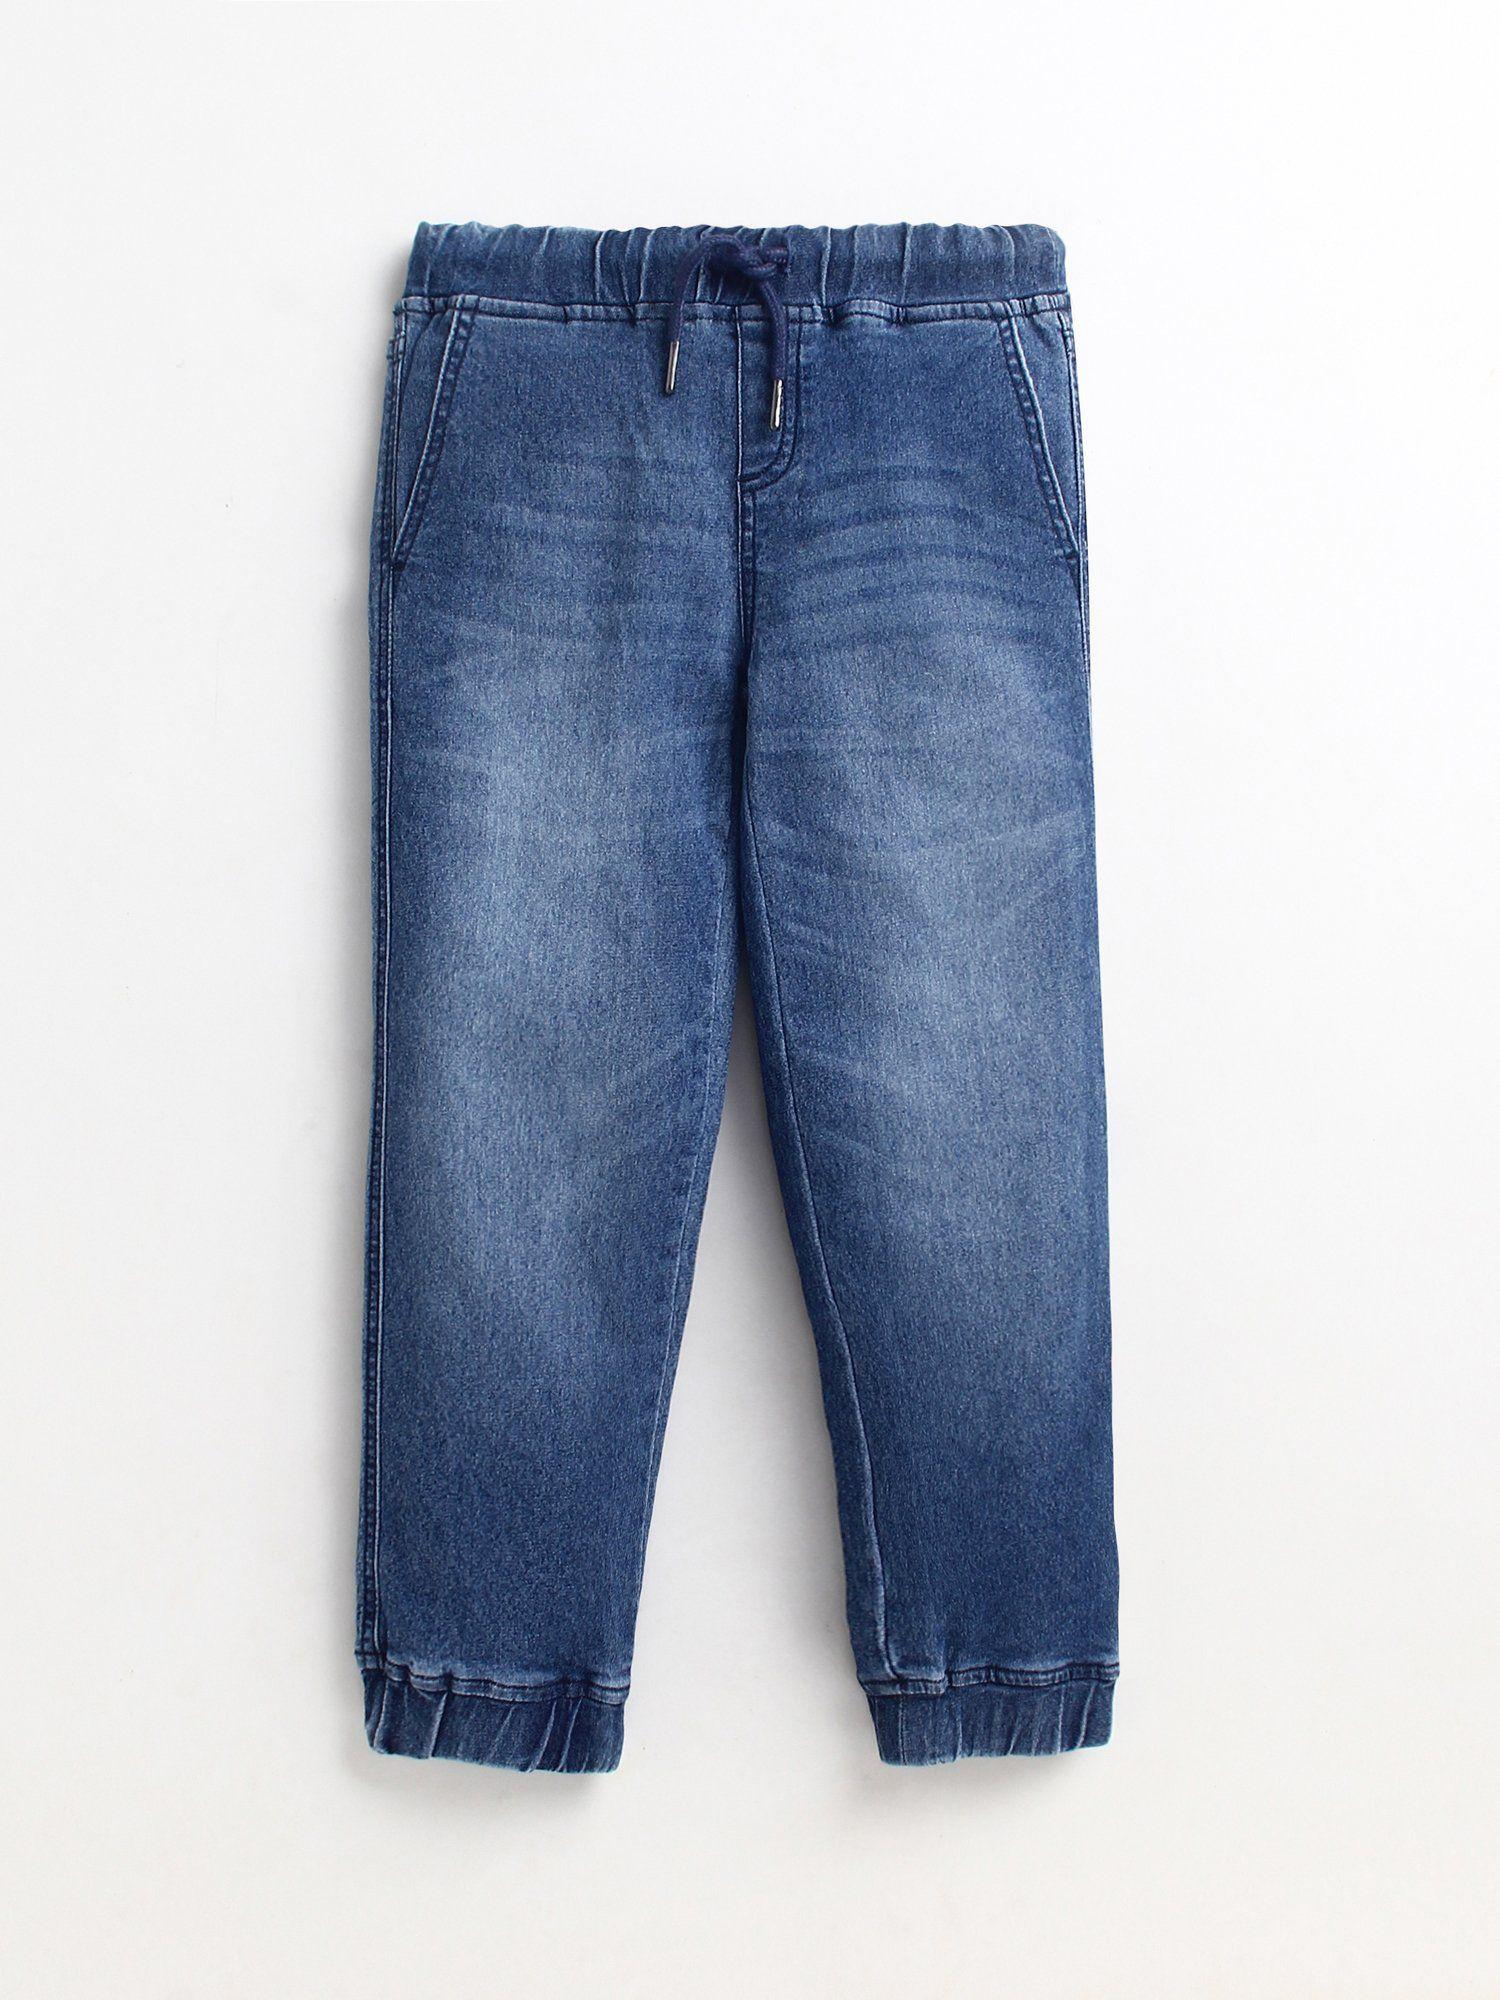 blue-washed-denim-own-roomy-jeans